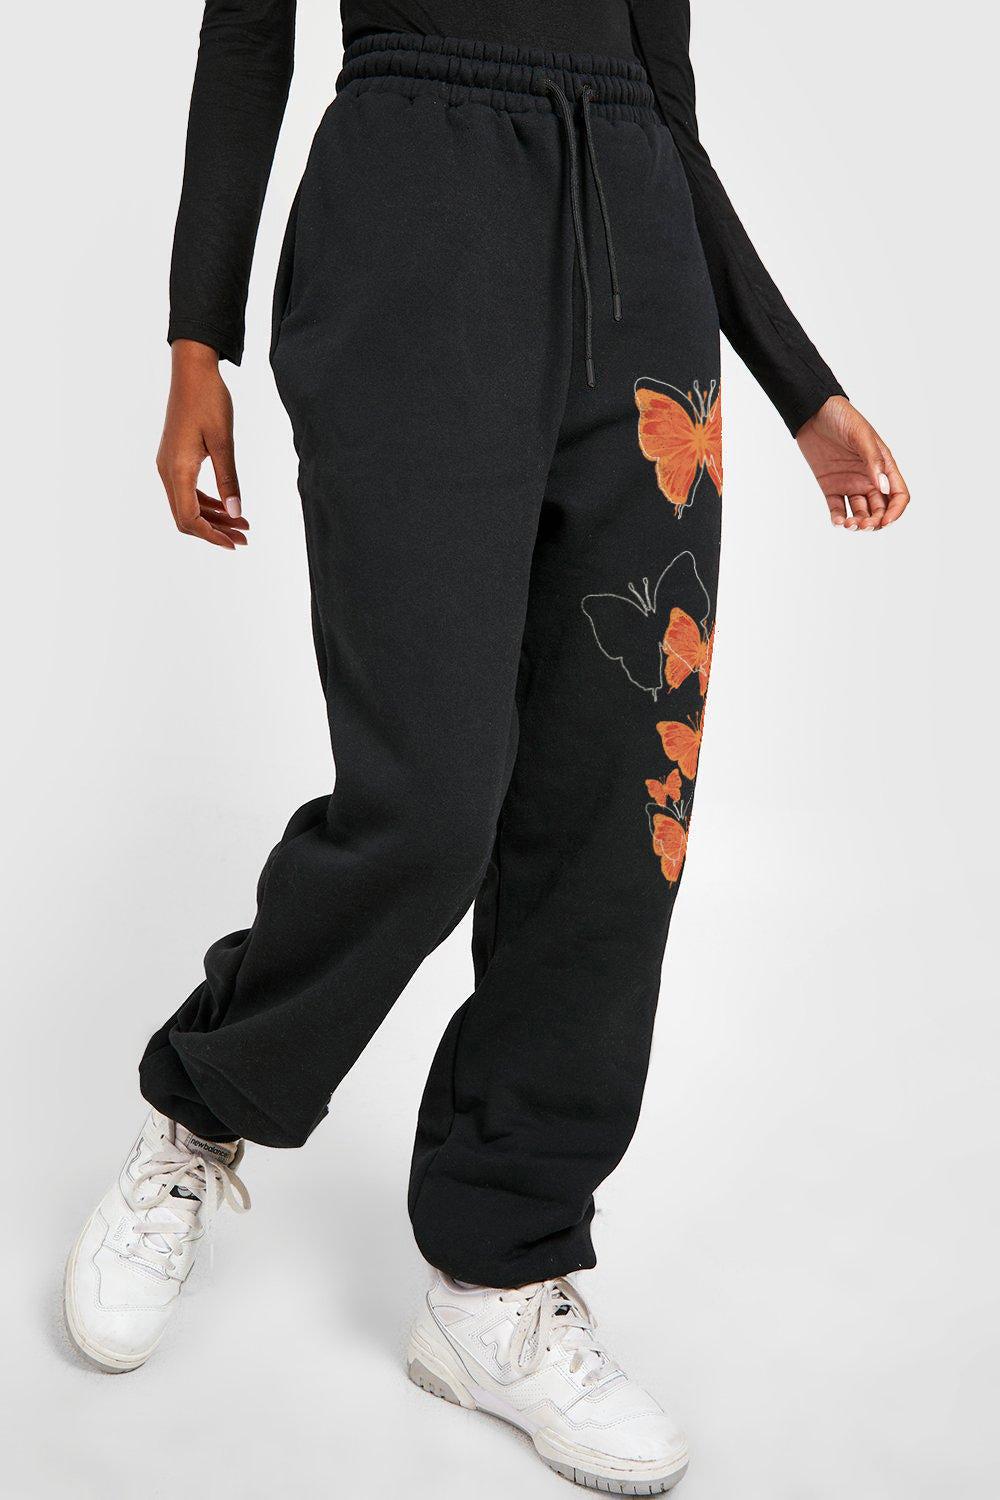 Simply Love Full Size Butterfly Graphic Sweatpants BLUE ZONE PLANET